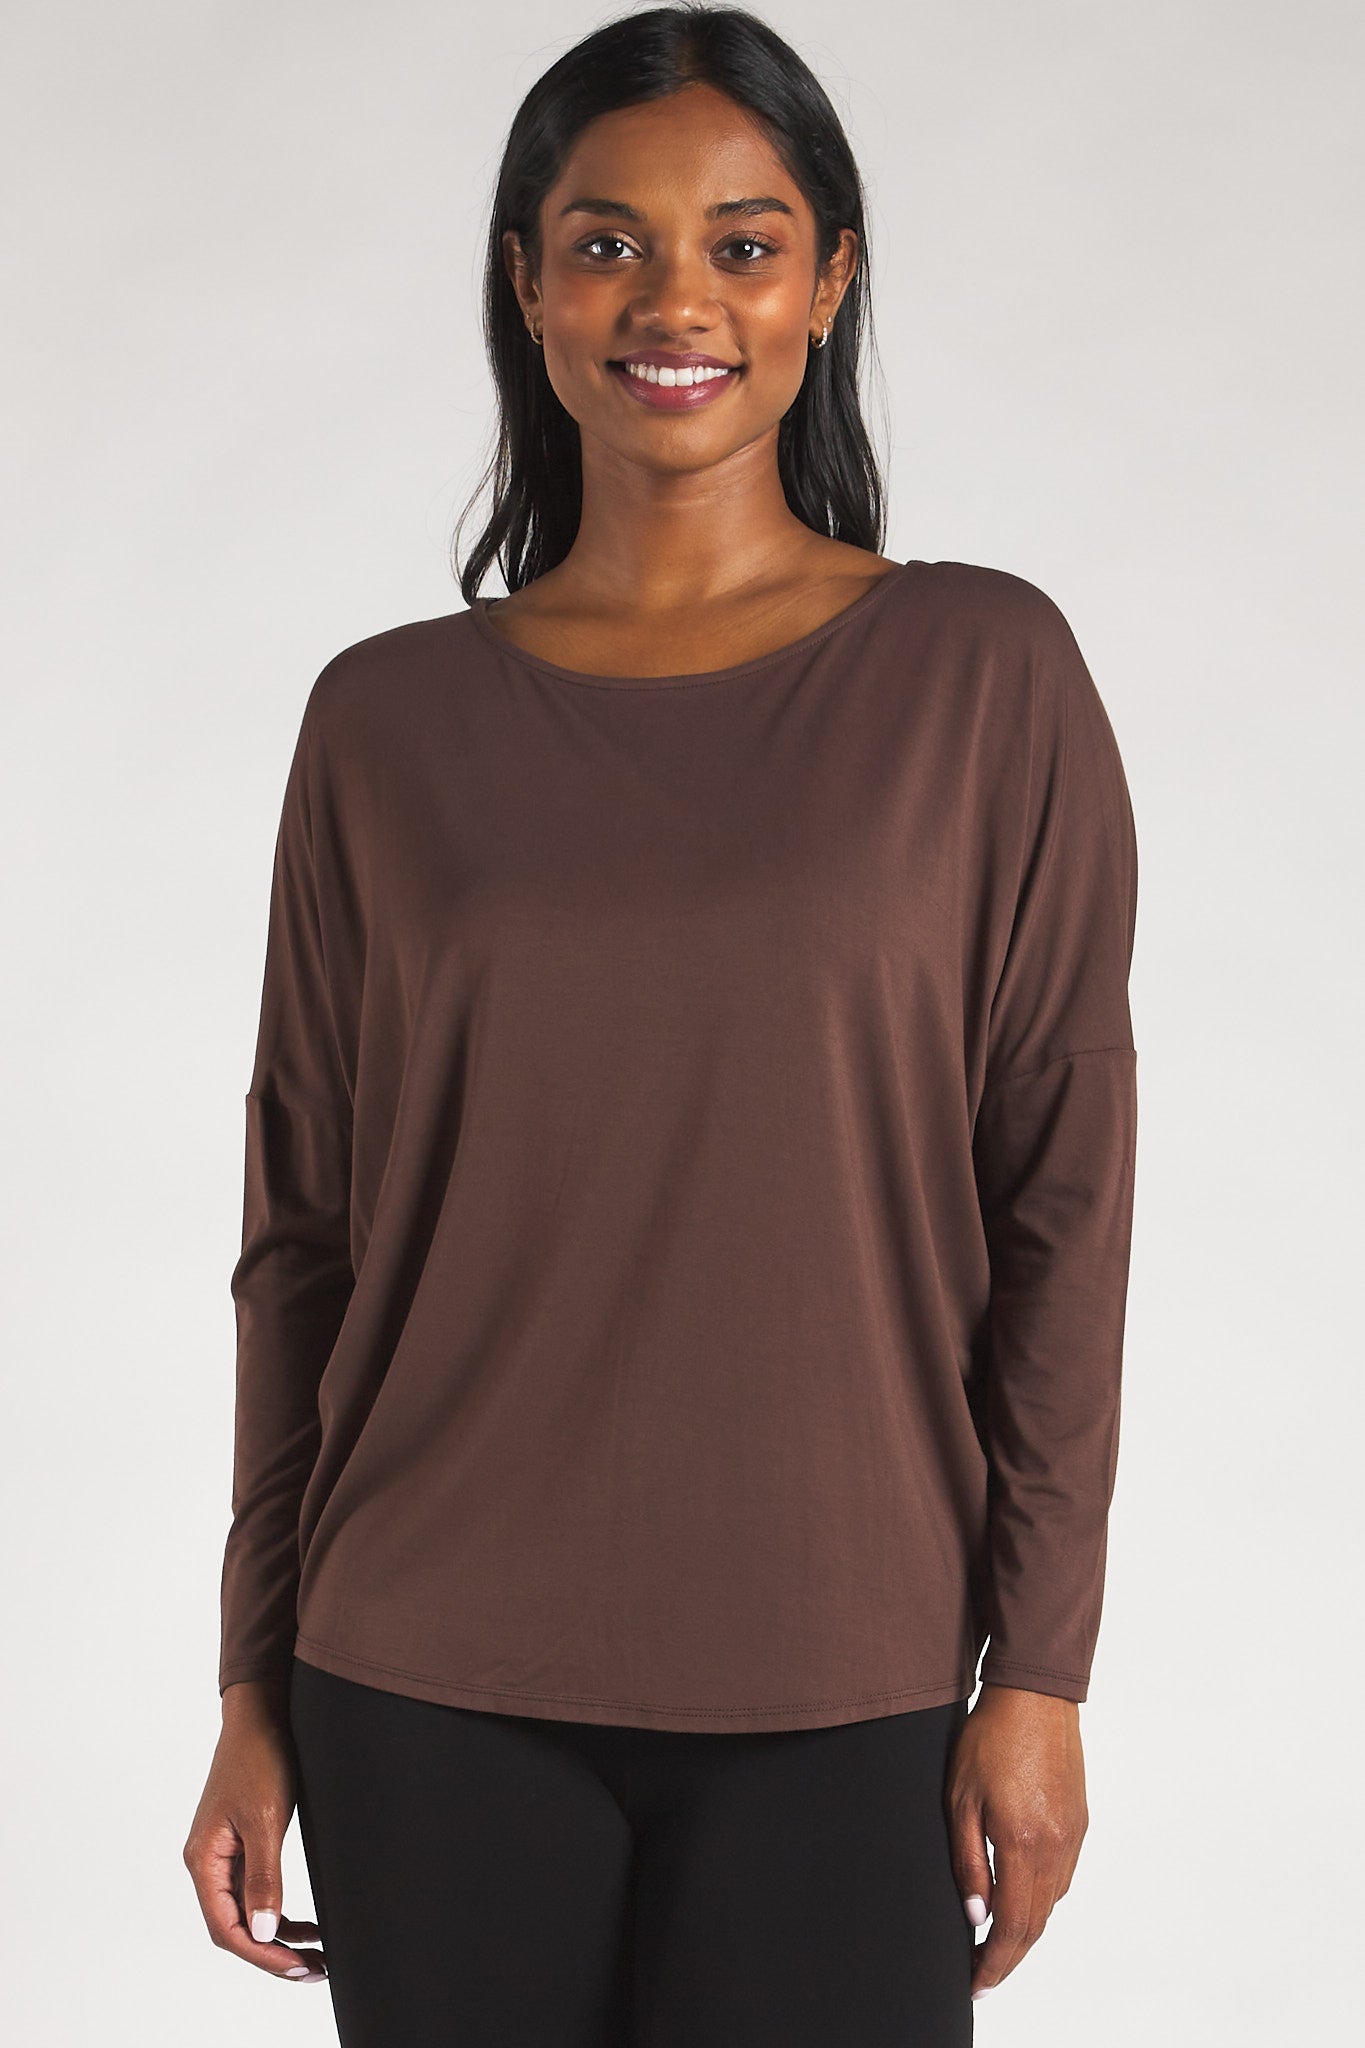 Woman's sustainable bamboo long sleeve top in dark brown by Terrera.